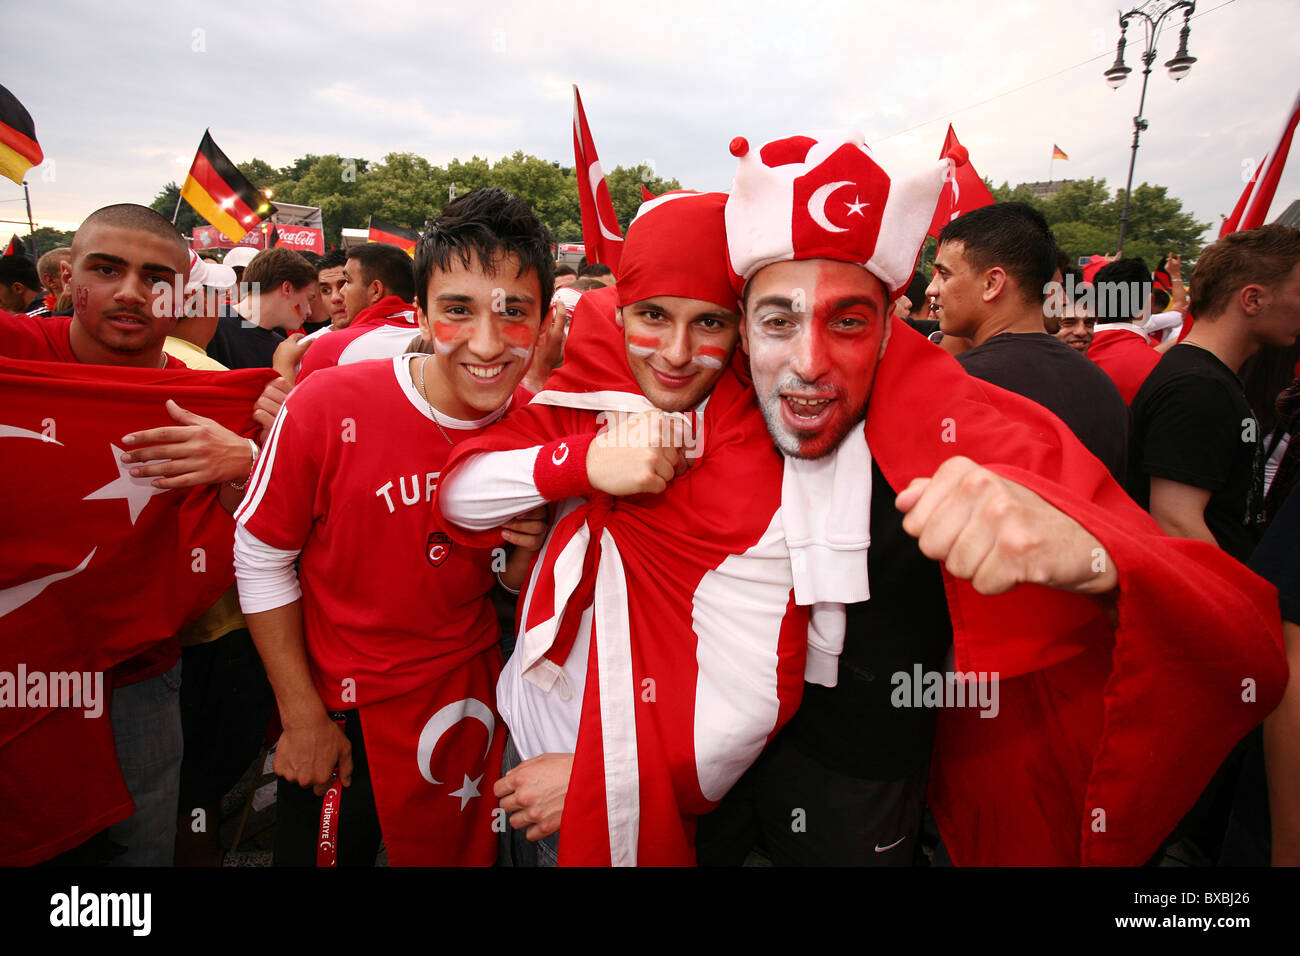 Football fans during the semi final match between Germany and Turkey, Berlin, Germany Stock Photo